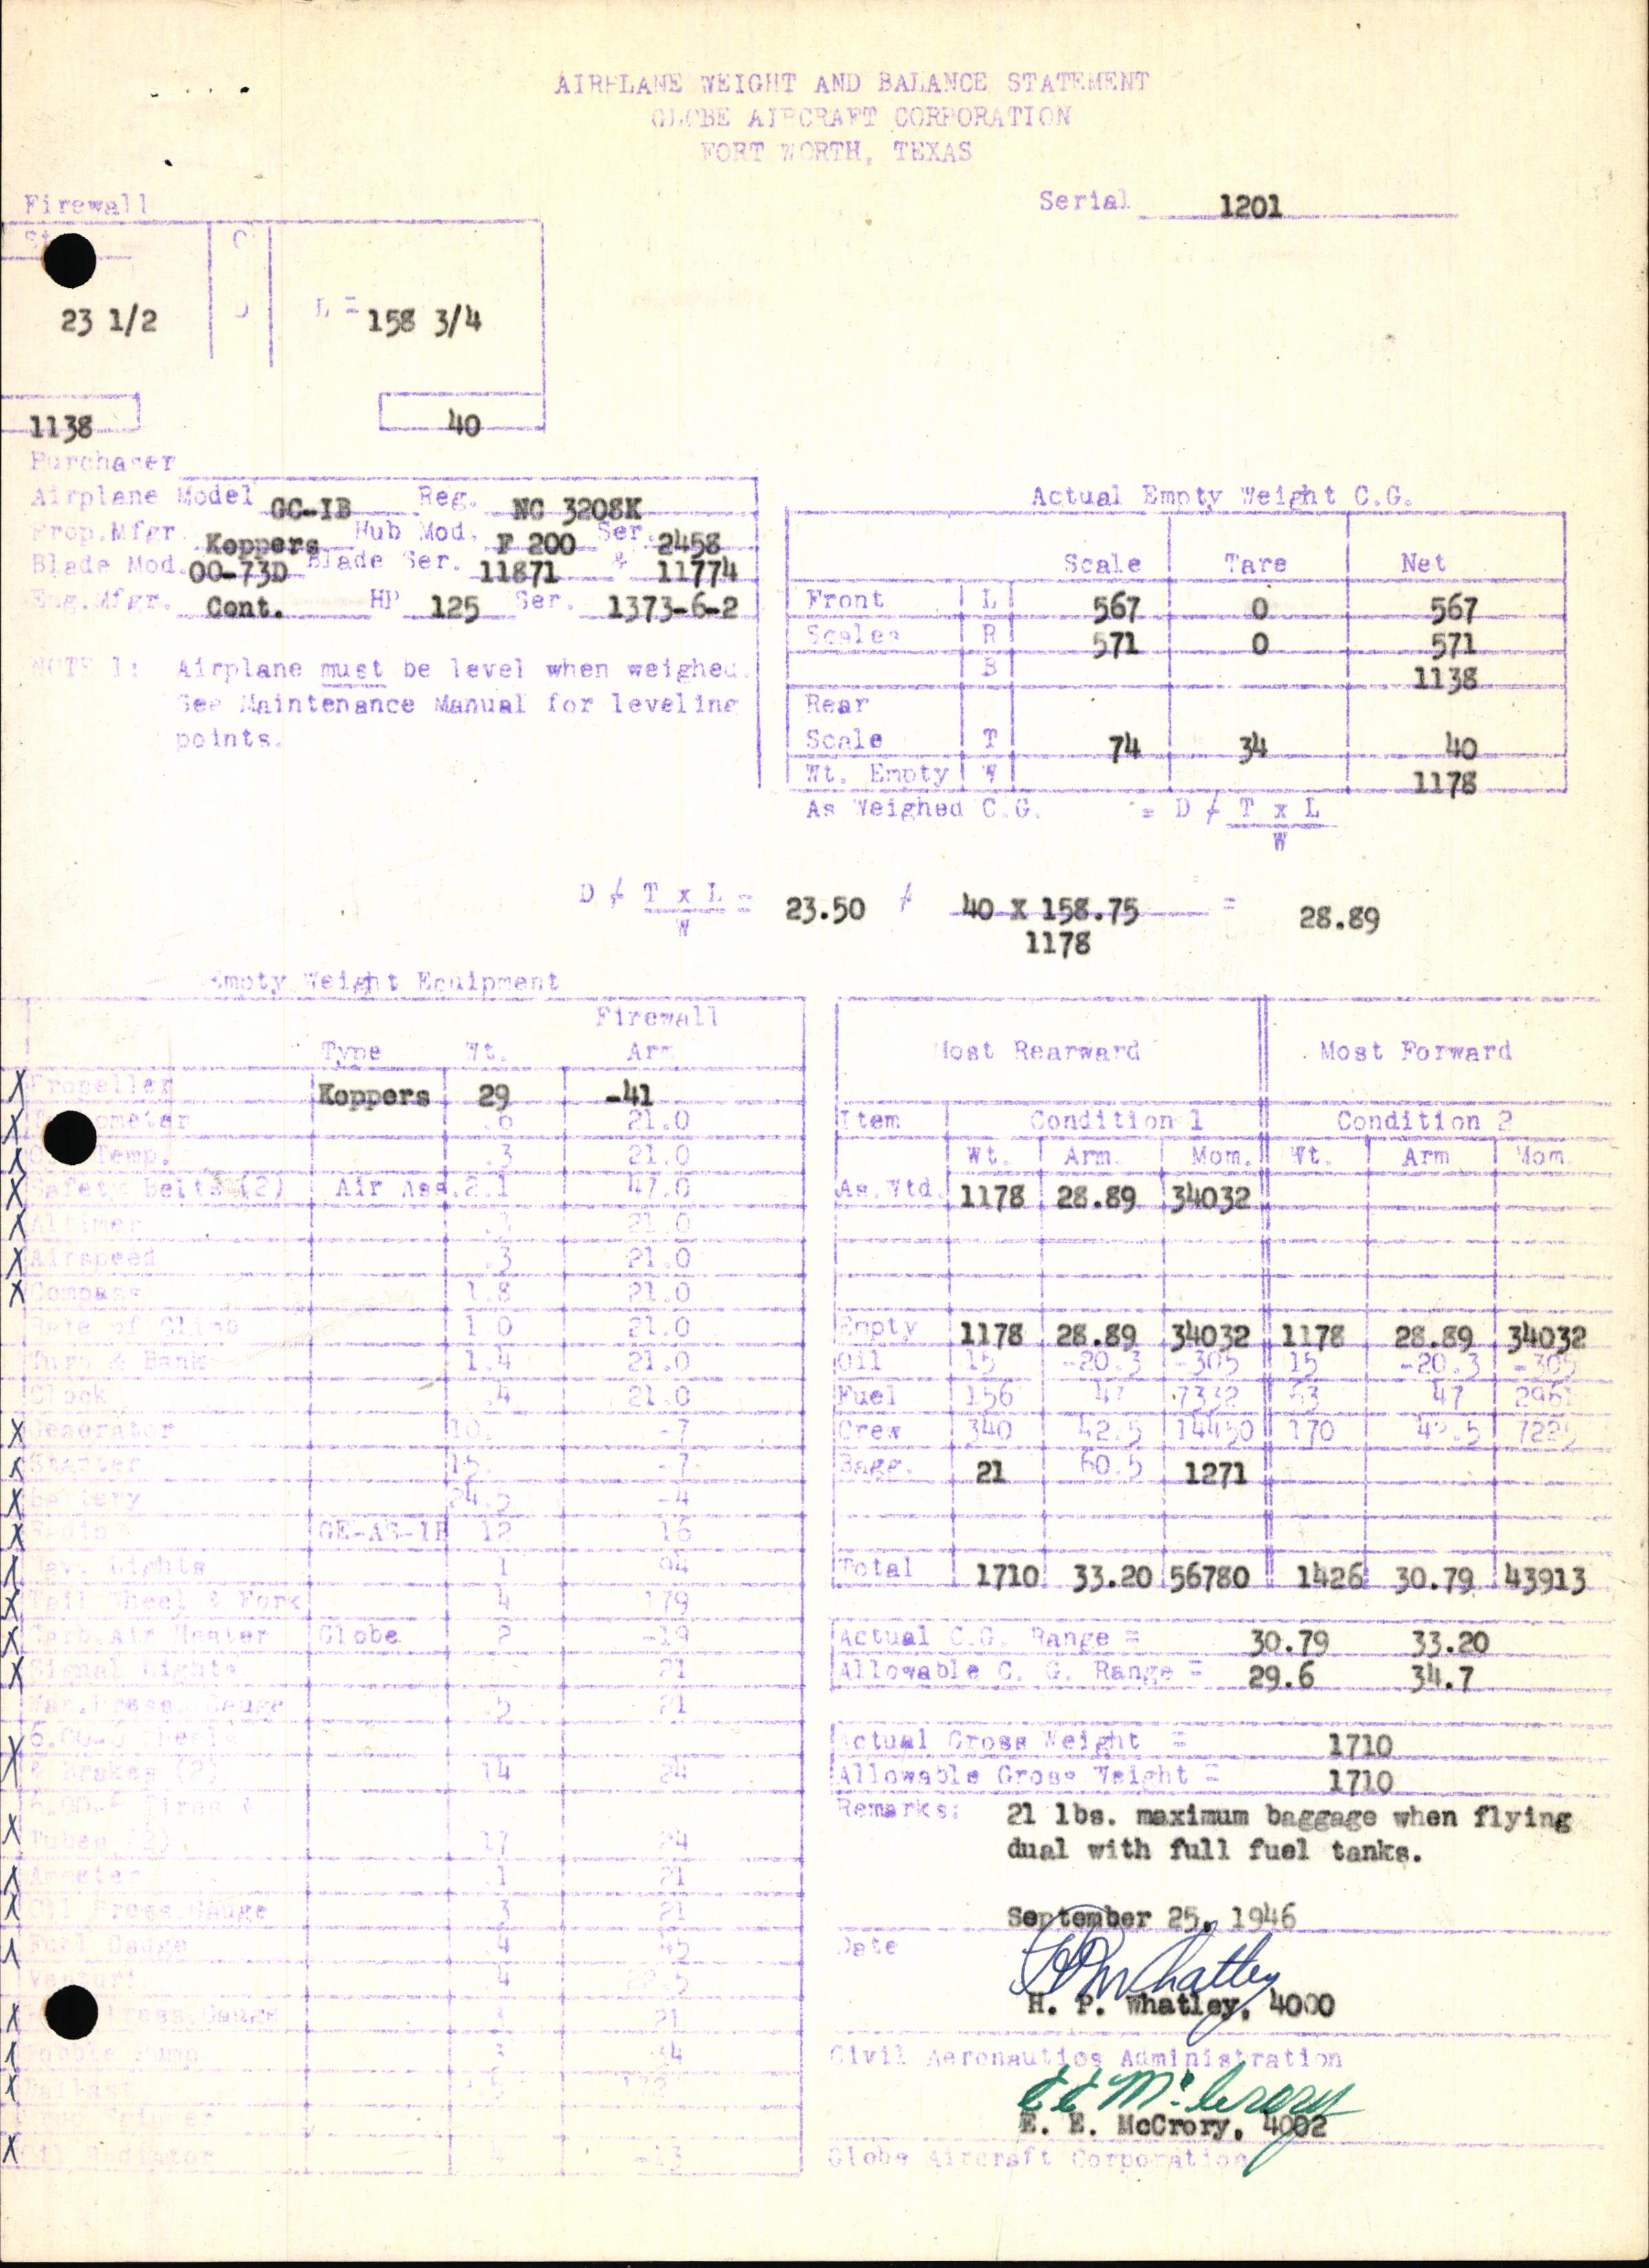 Sample page 7 from AirCorps Library document: Technical Information for Serial Number 1201